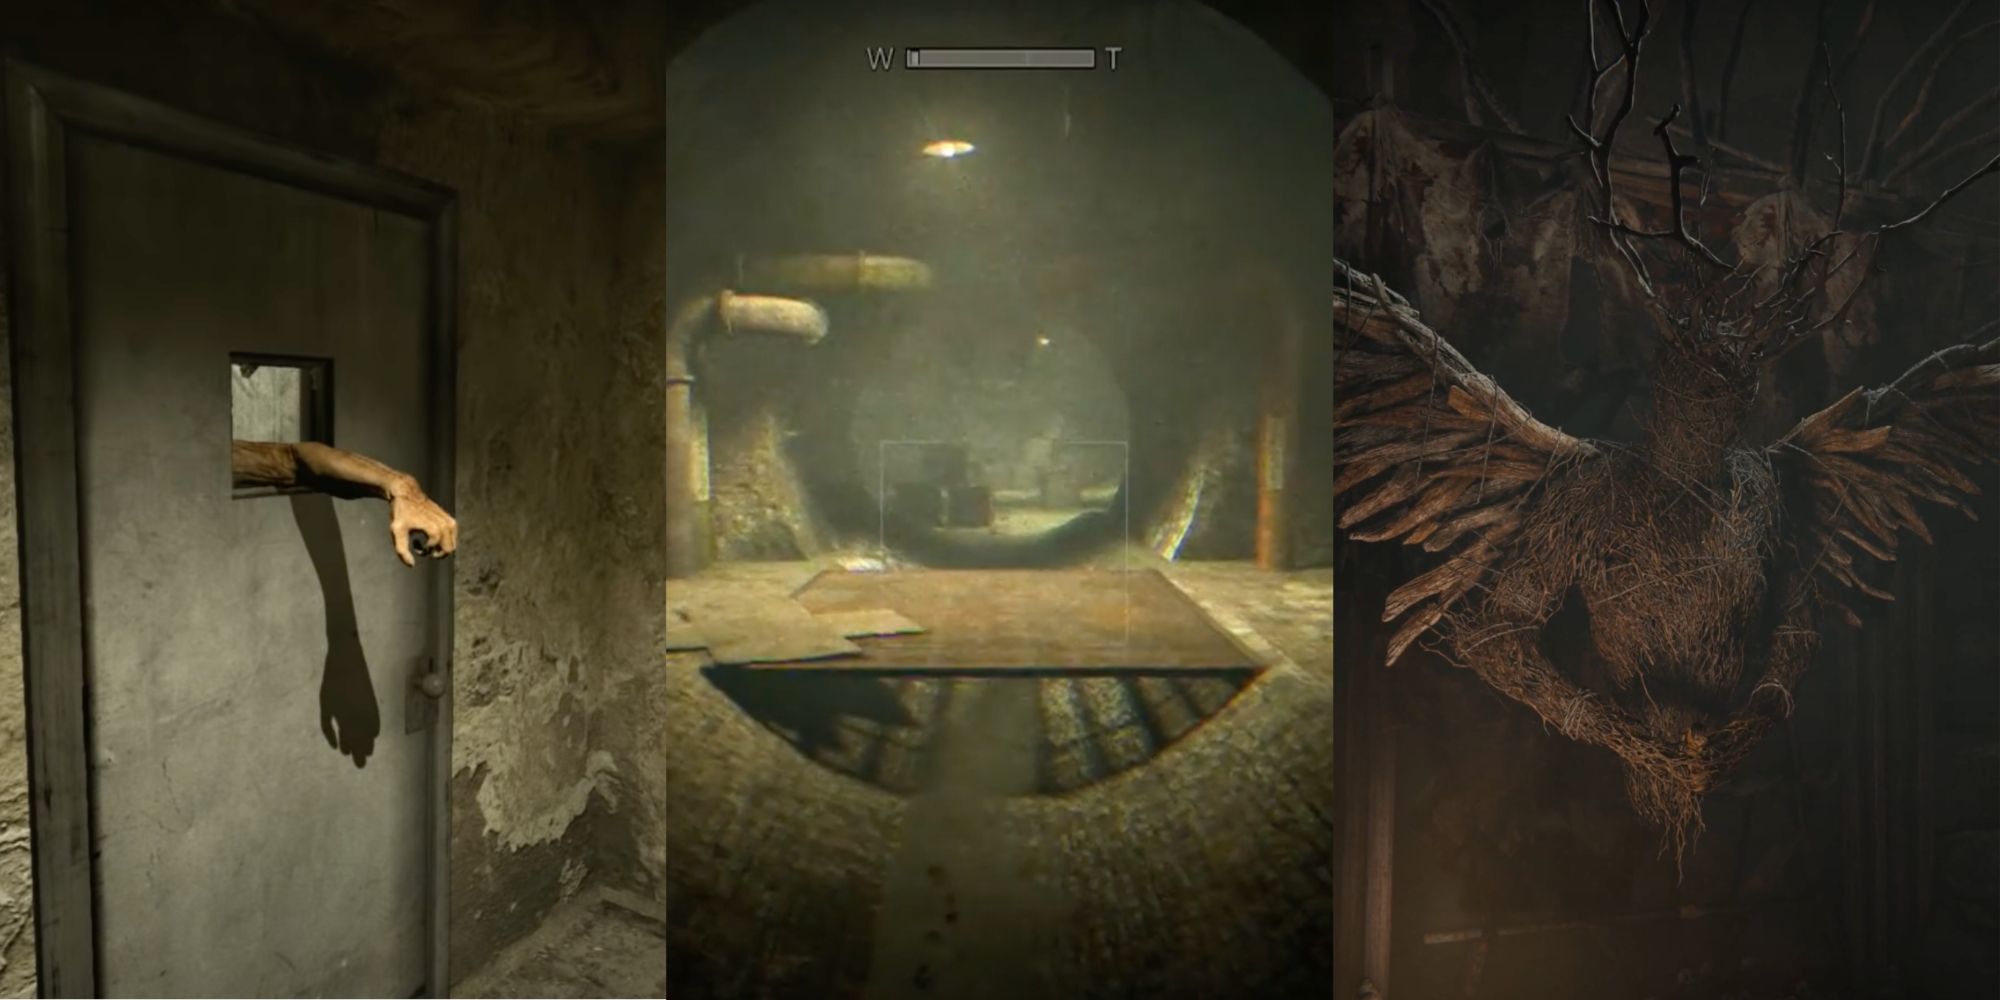 outlast creepiest locations header prison block sewers heretic temple